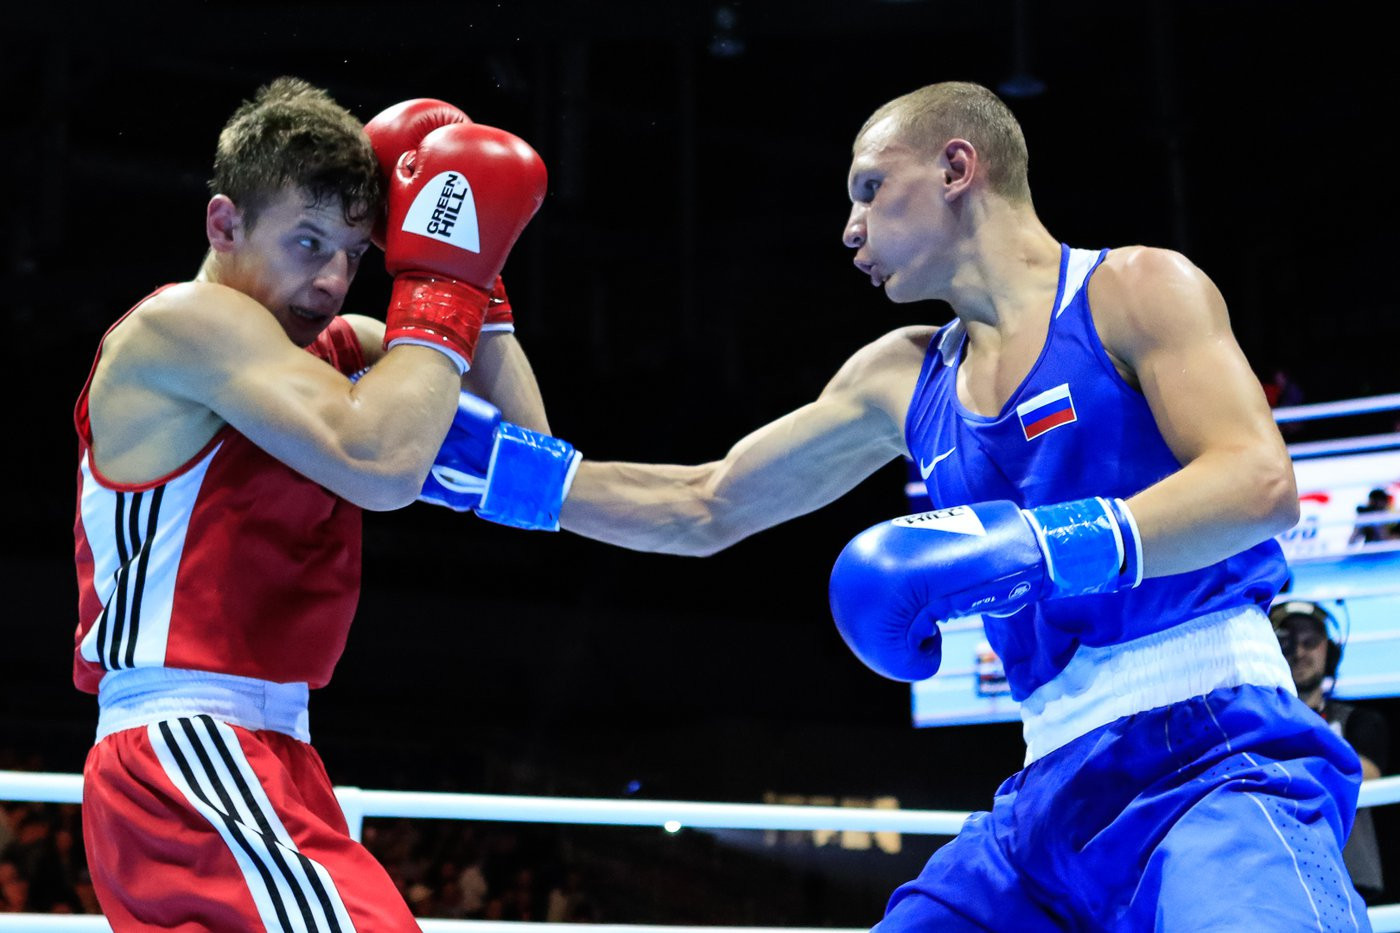 Ilia Popov was another victorious Russian boxer, unanimously defeating Alexandru Paraschiv of Moldova in the light welterweight division ©Yekaterinburg 2019